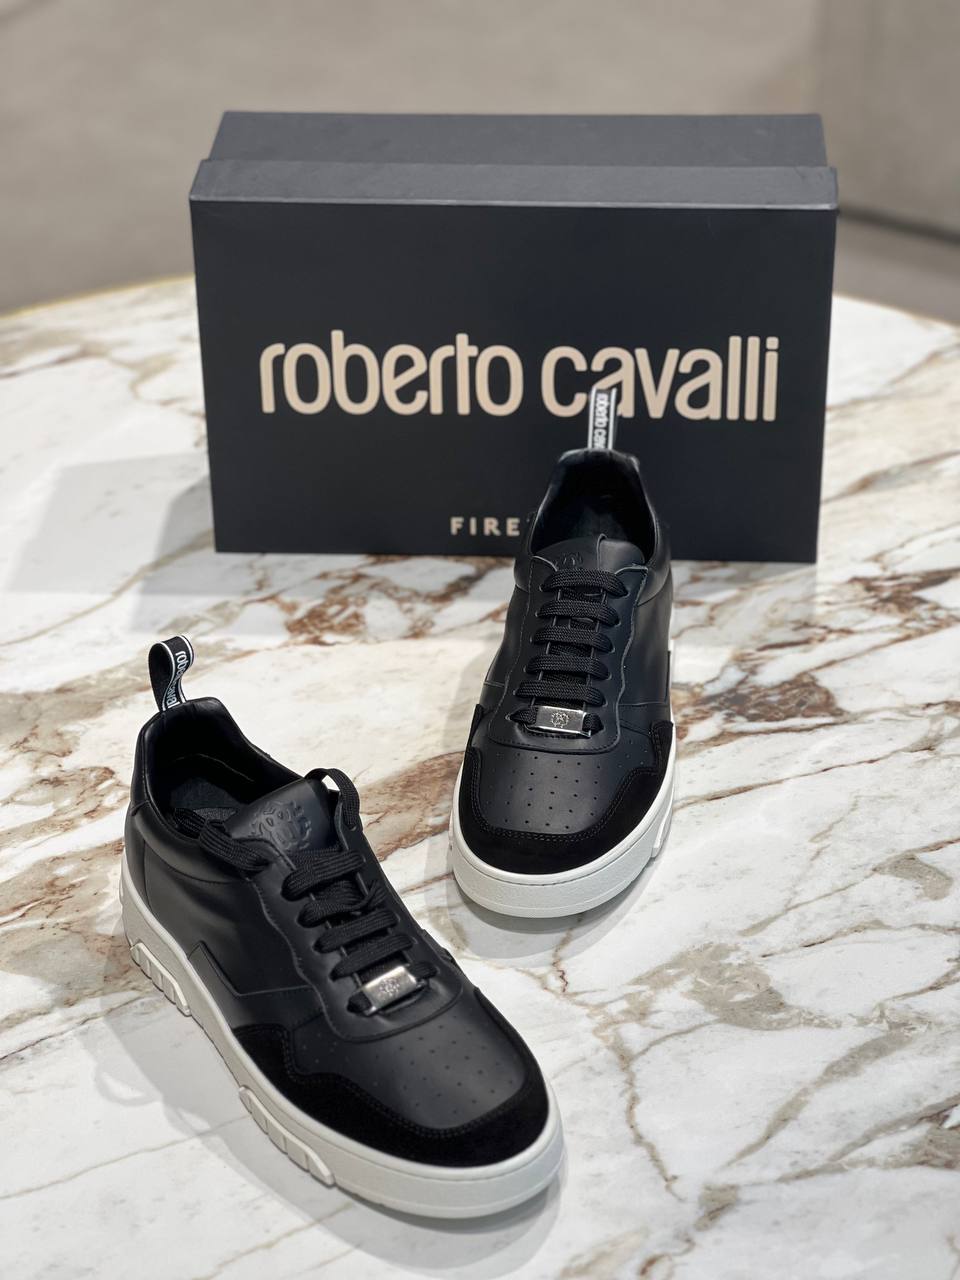 Roberto Cavalli Outlets 4690